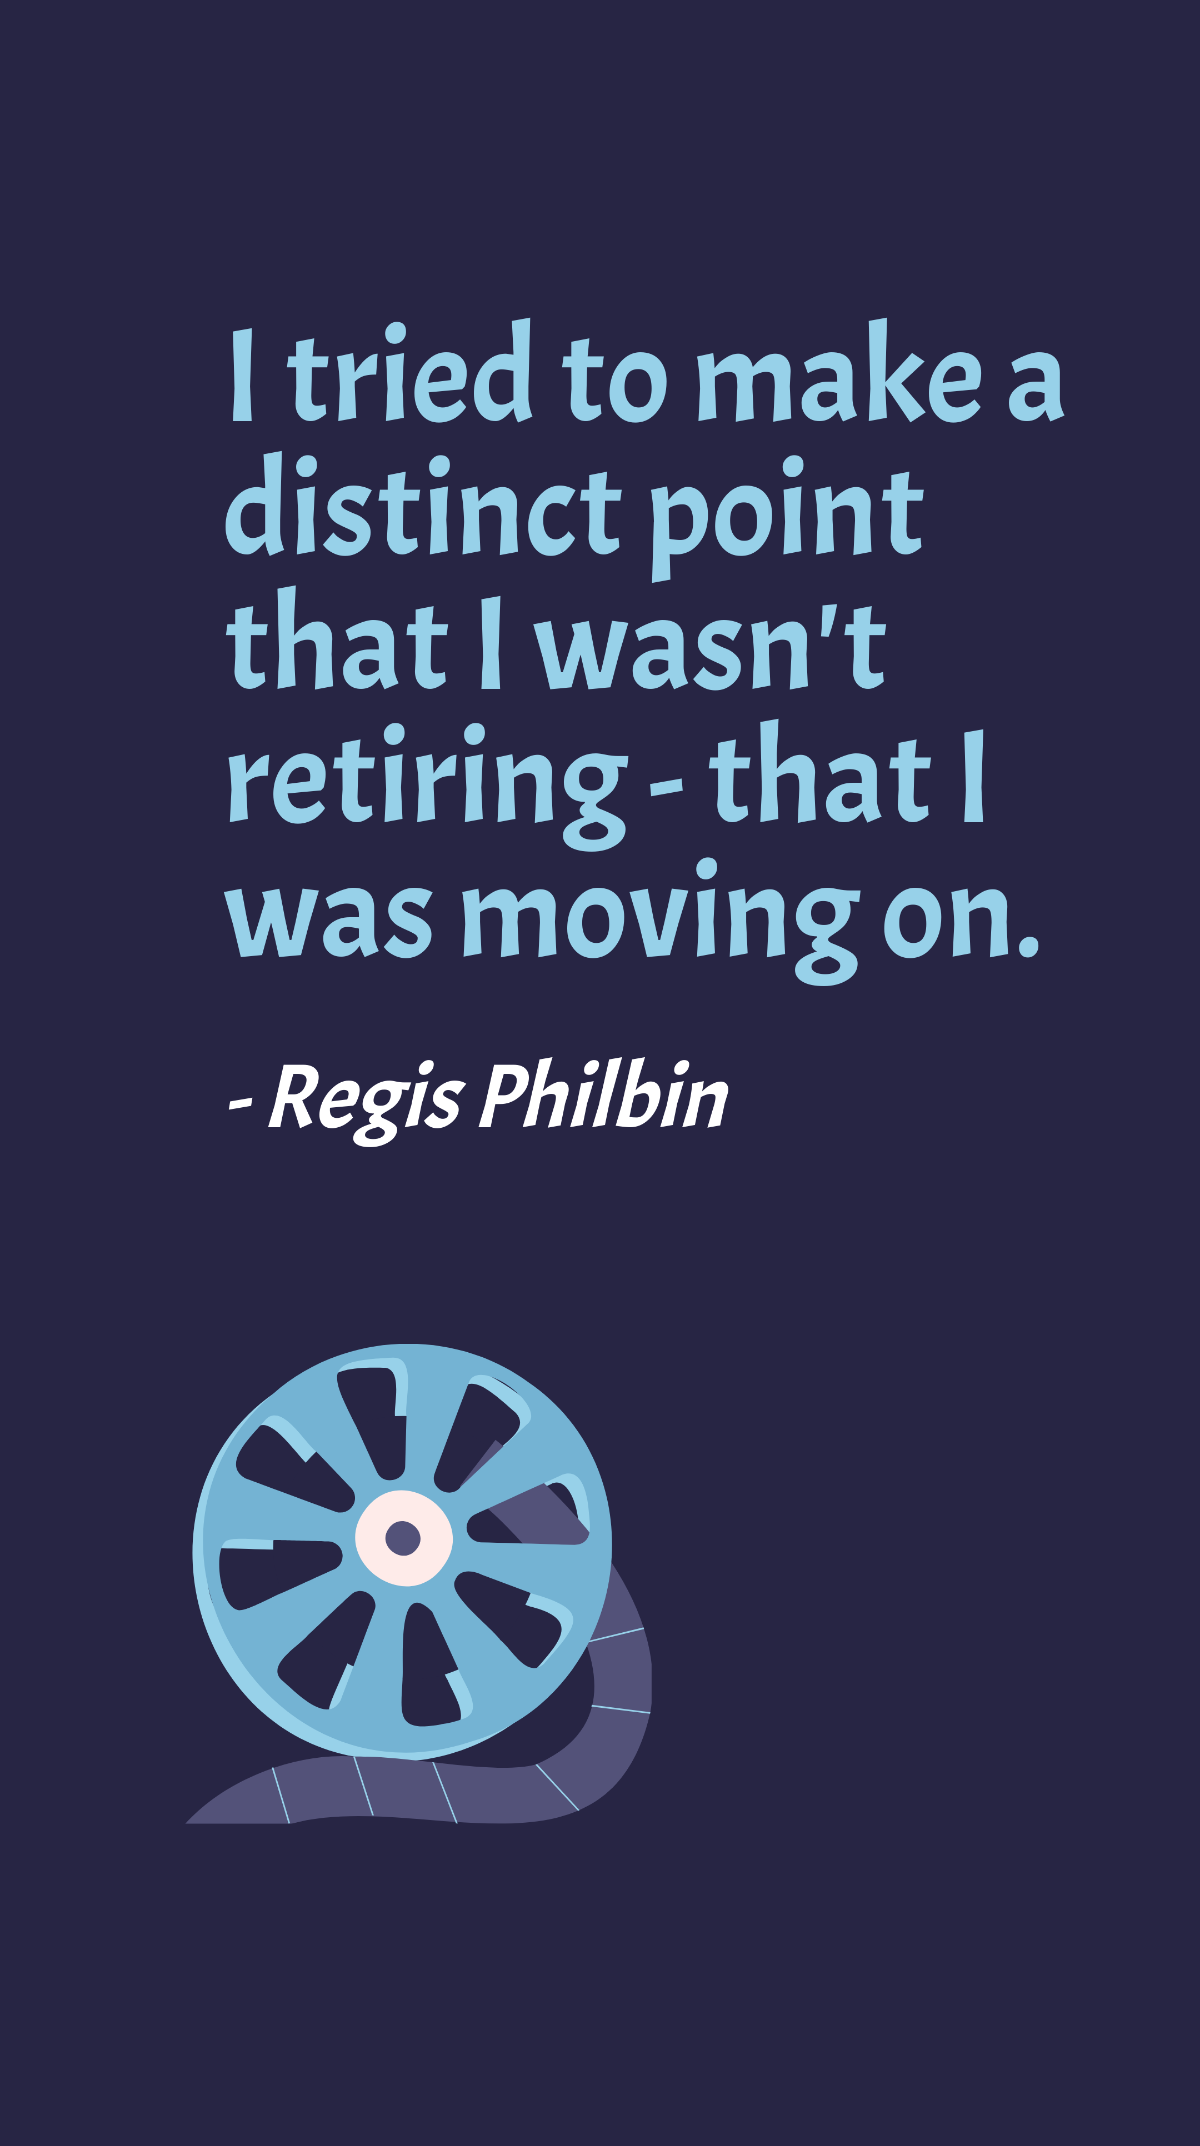 Regis Philbin - I tried to make a distinct point that I wasn't retiring - that I was moving on. Template